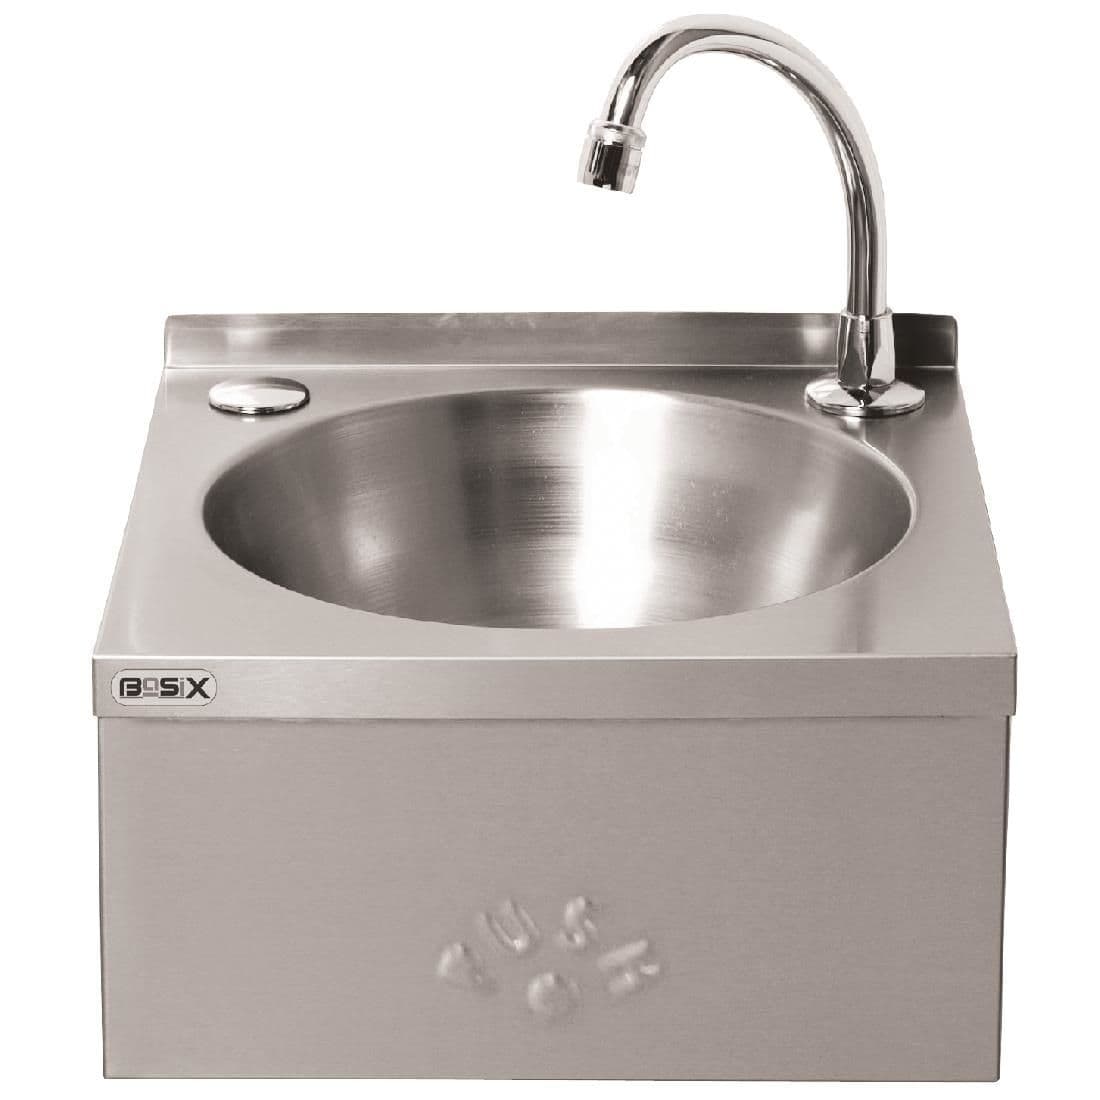 Basix Stainless Steel Knee Operated Hand Wash Basin JD Catering Equipment Solutions Ltd